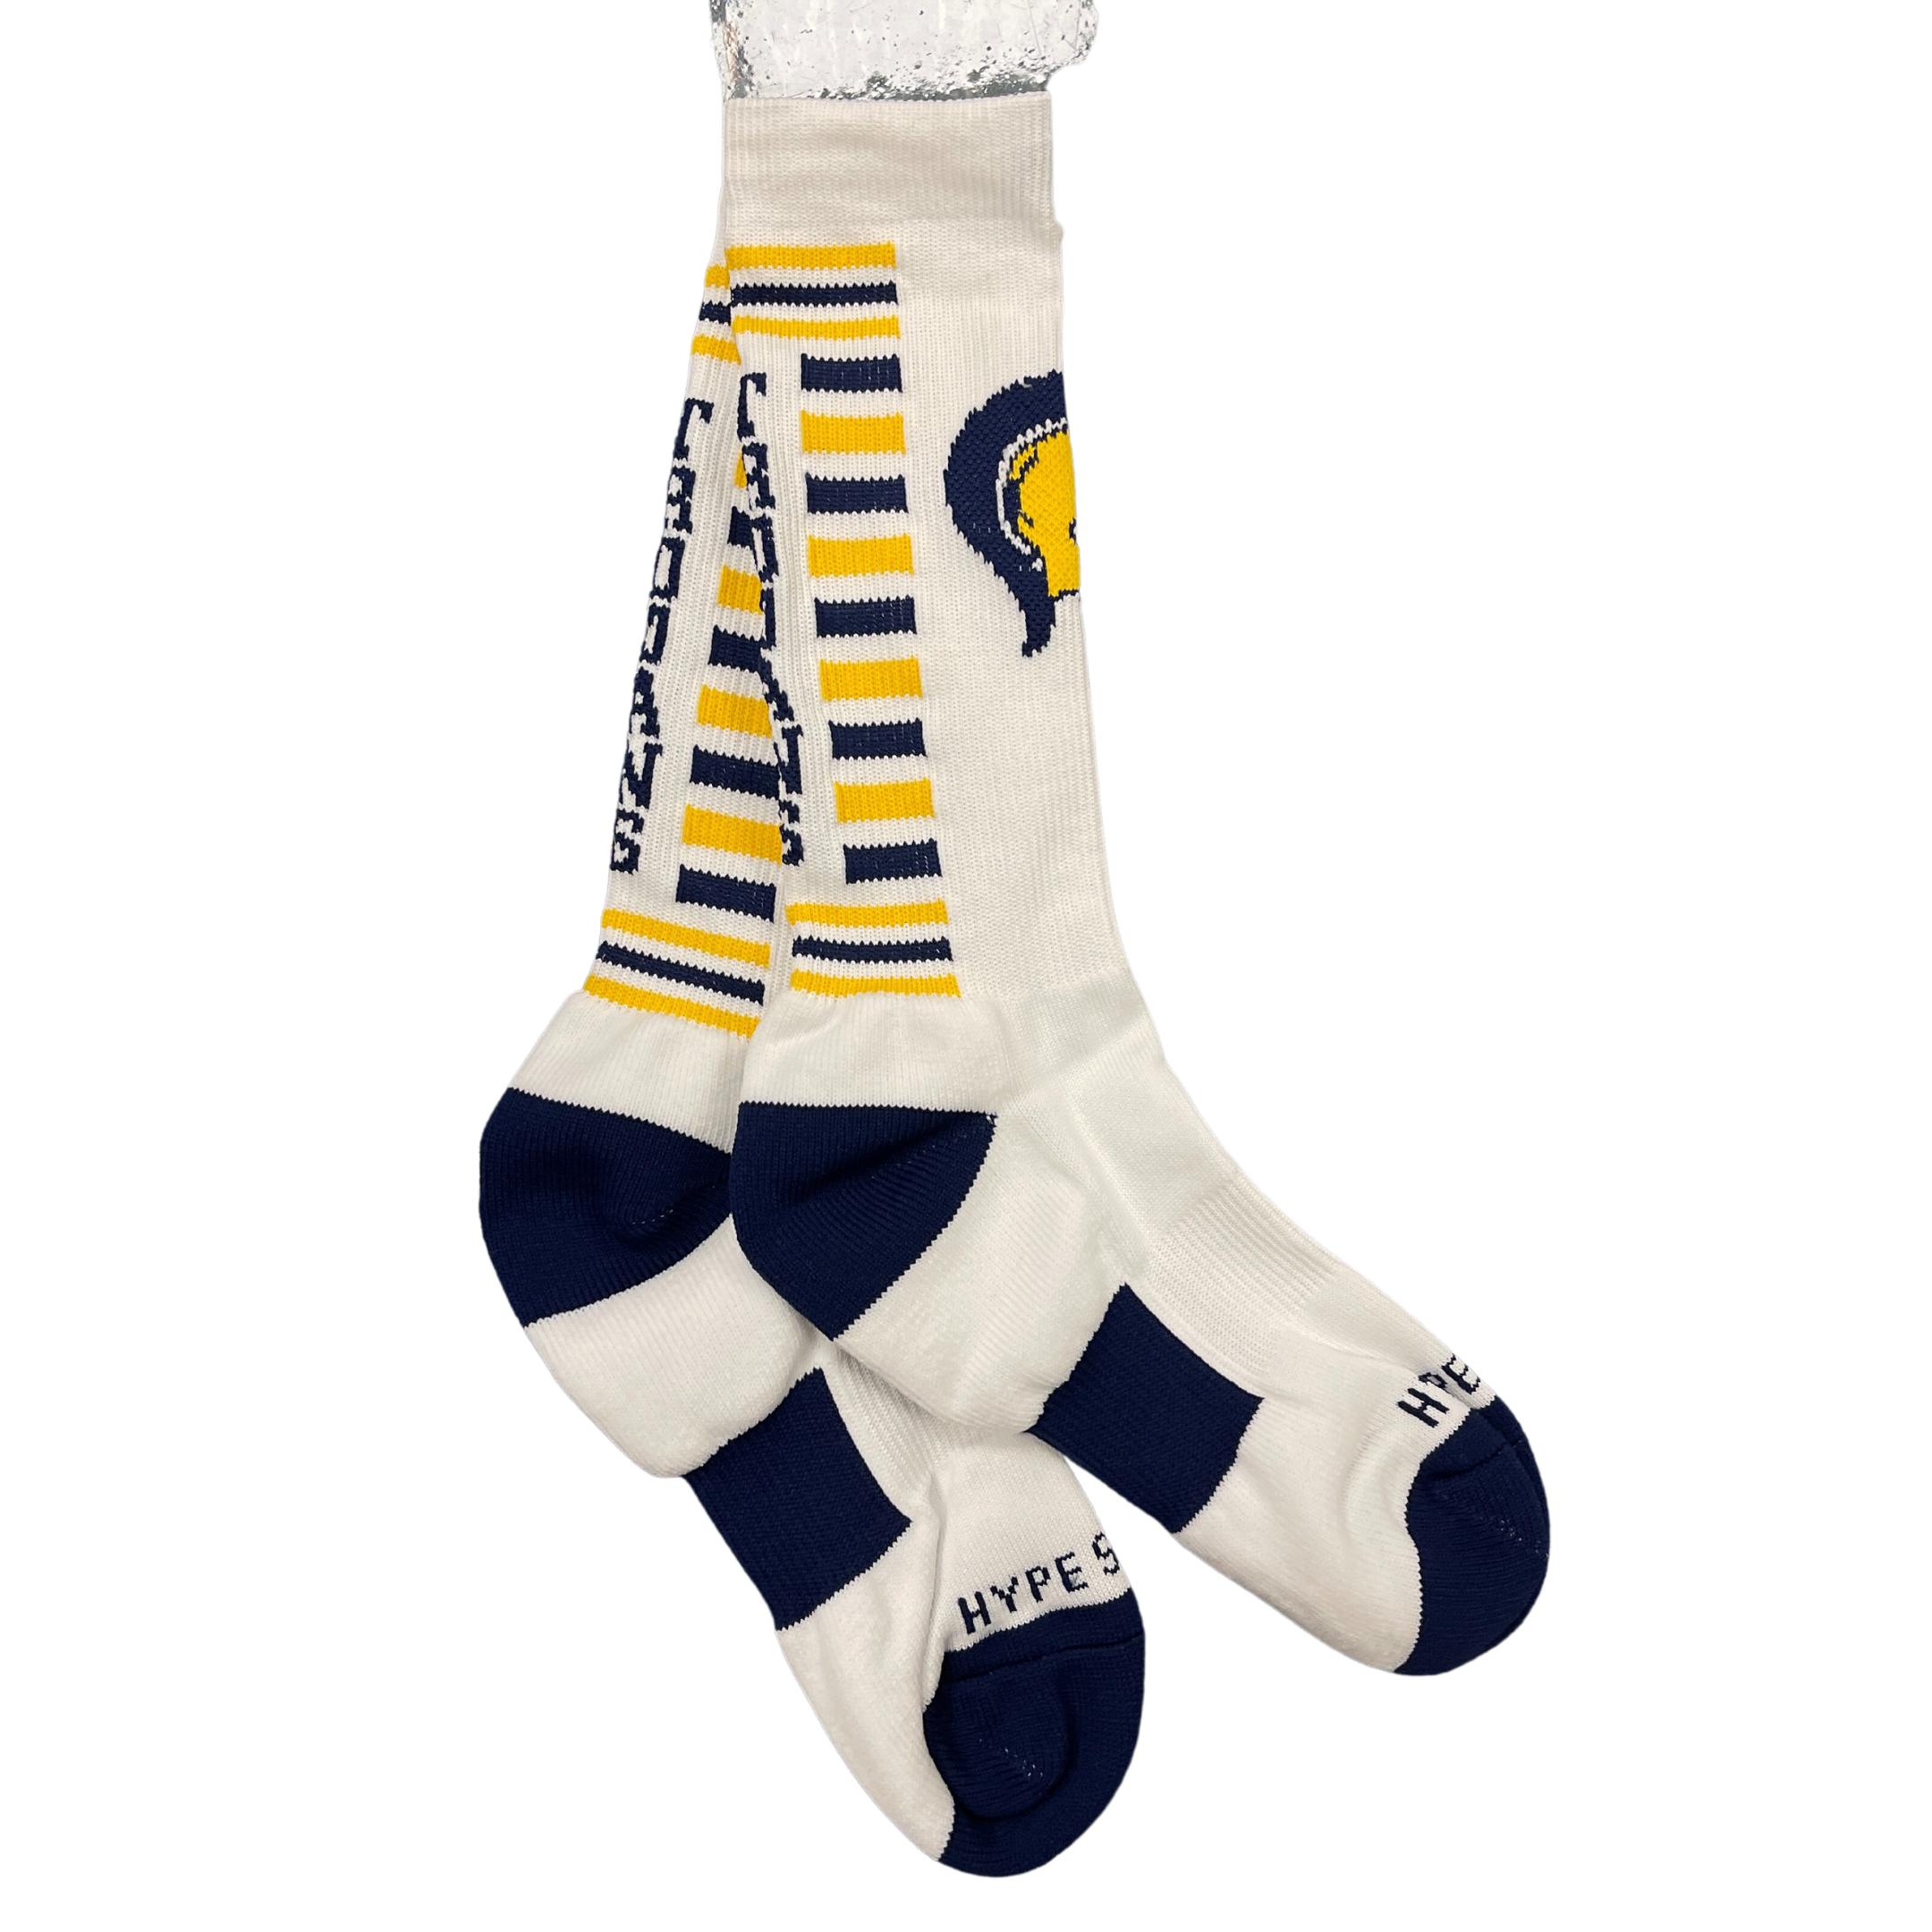 NEW Embroidered Performance Socks